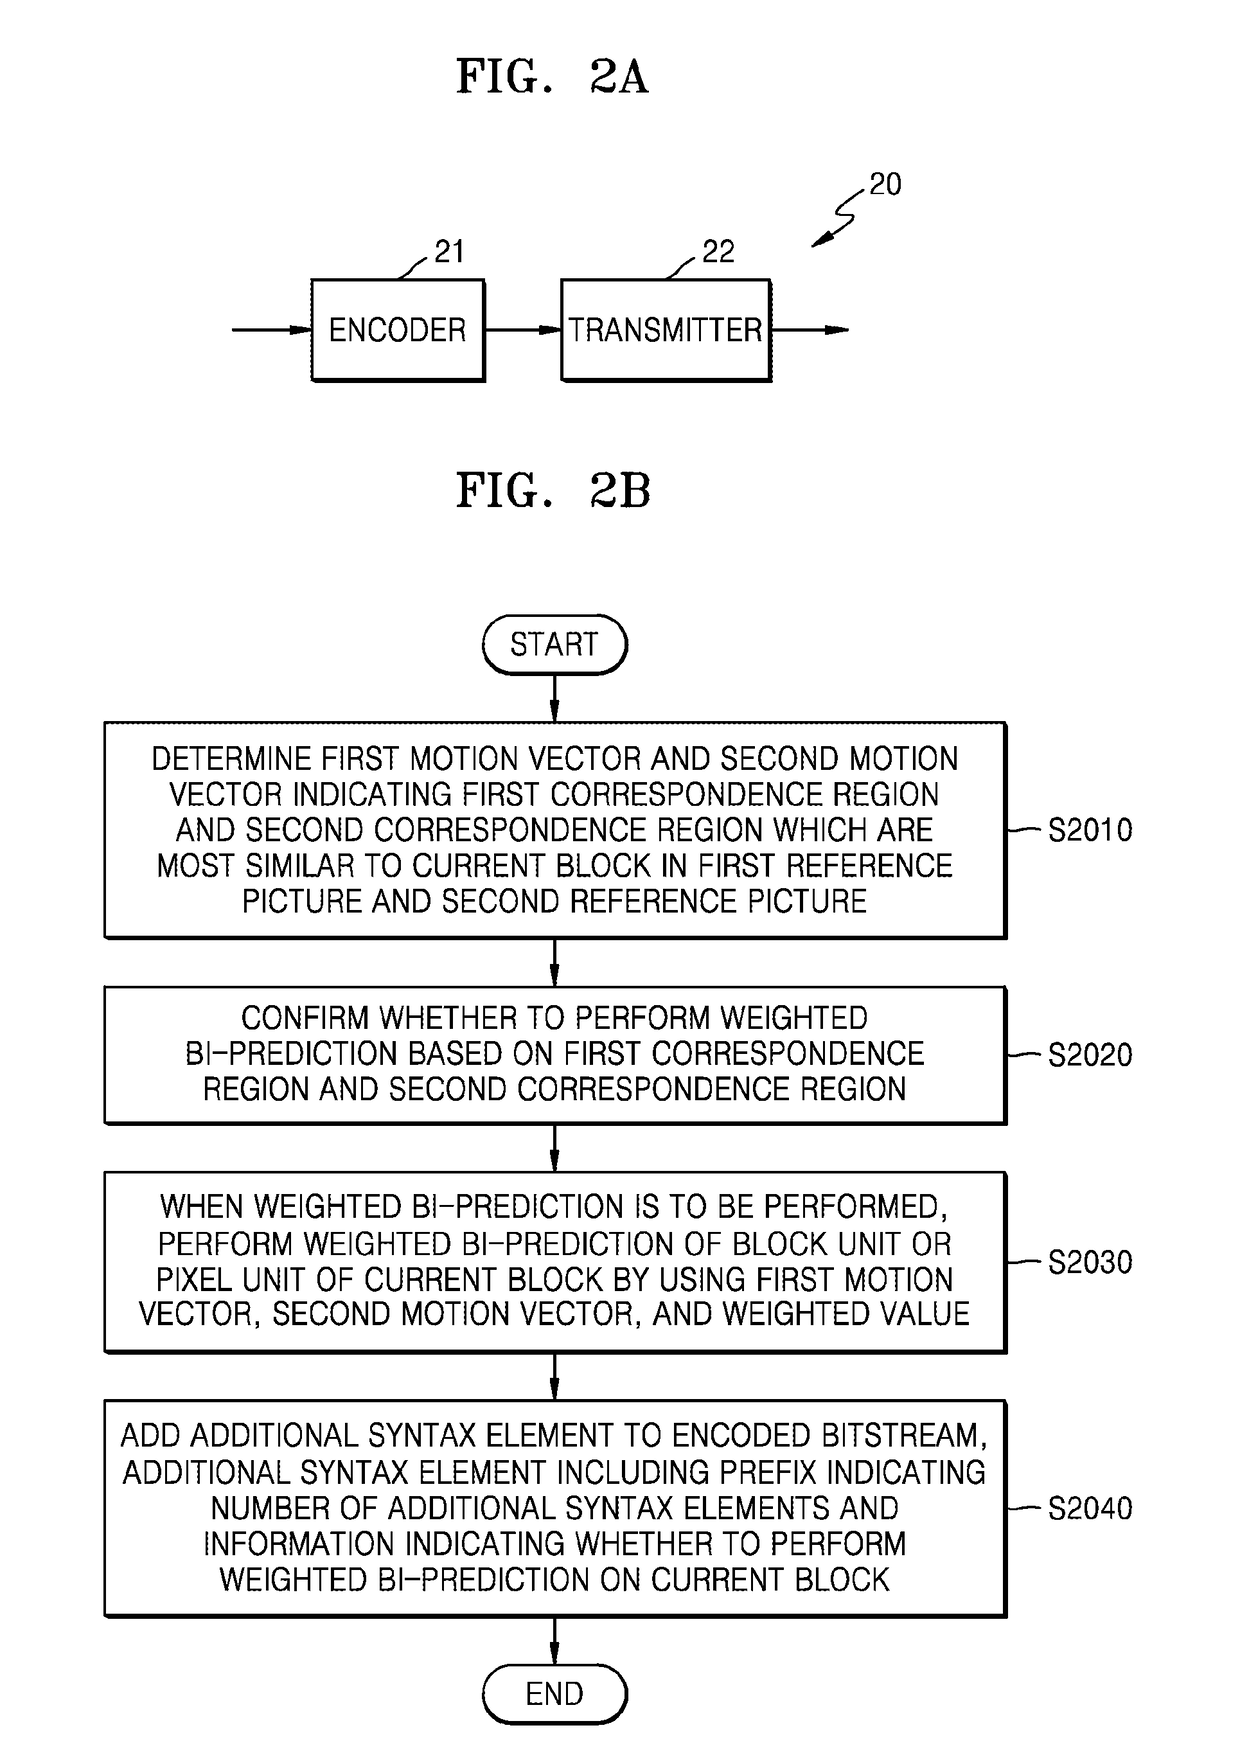 Method and apparatus for encoding or decoding image using syntax signaling for adaptive weight prediction